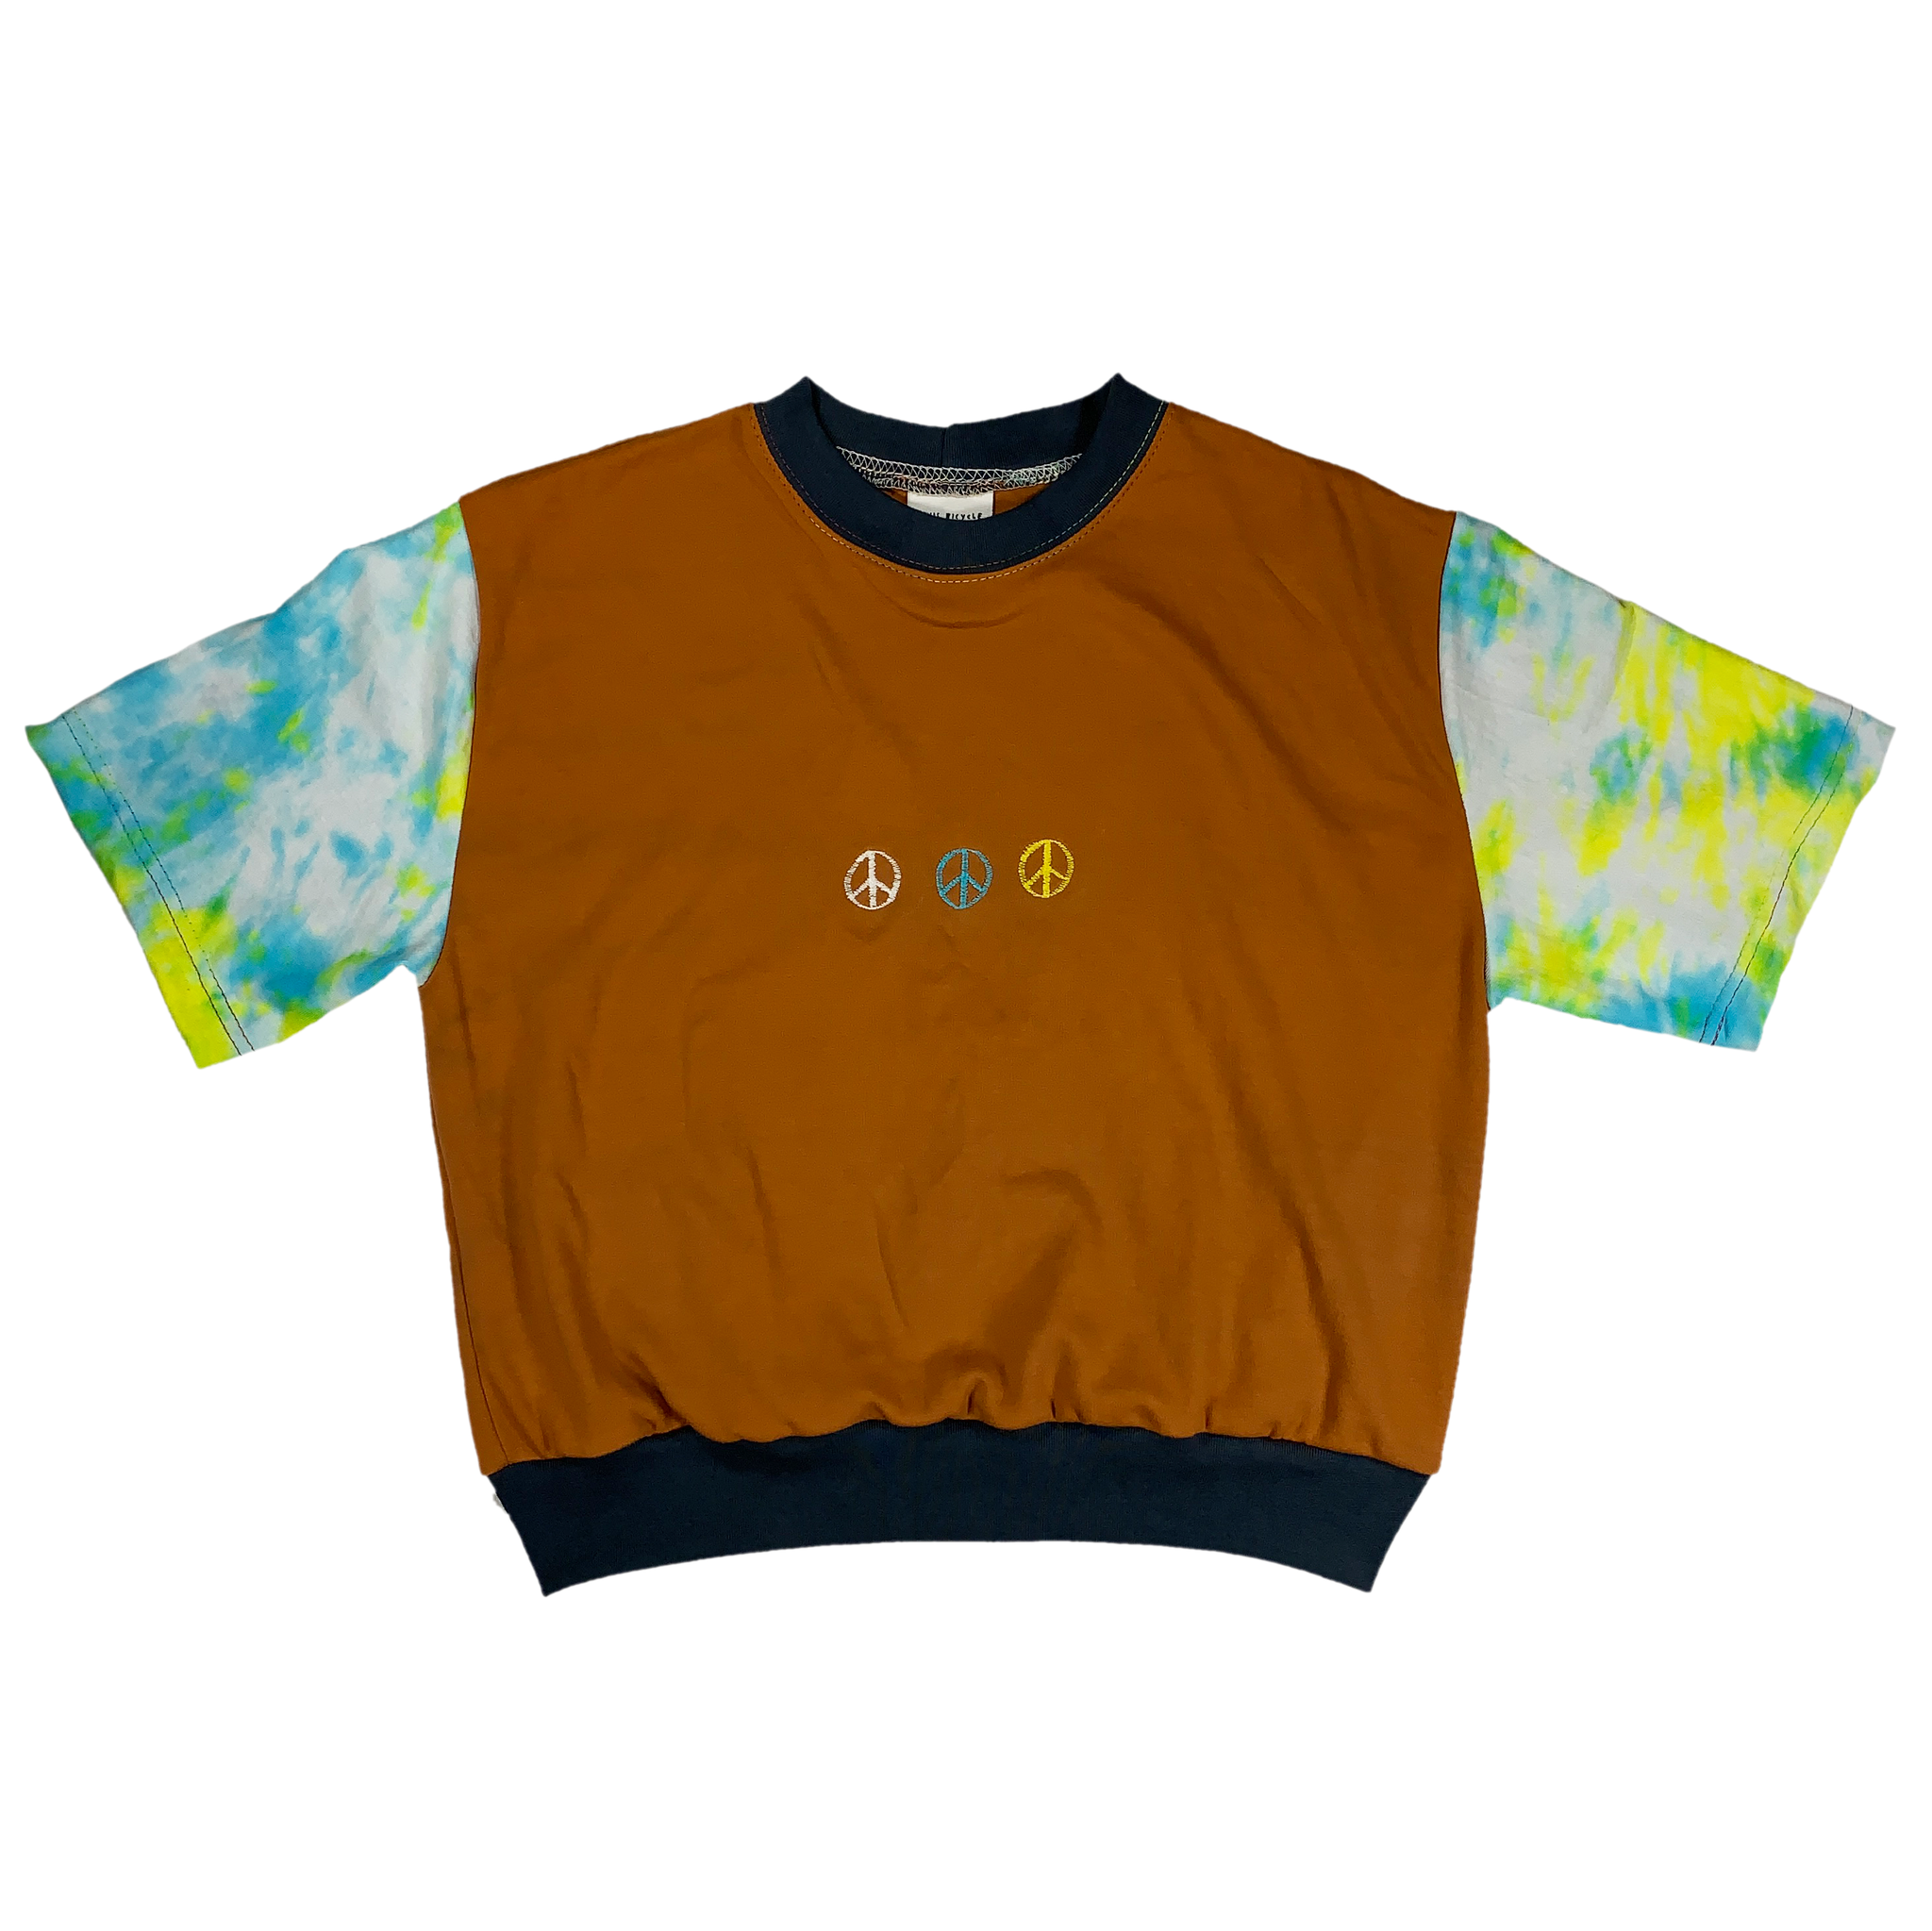 Home sewn crop tee - organic + secondhand cotton - embroidered and dyed - M